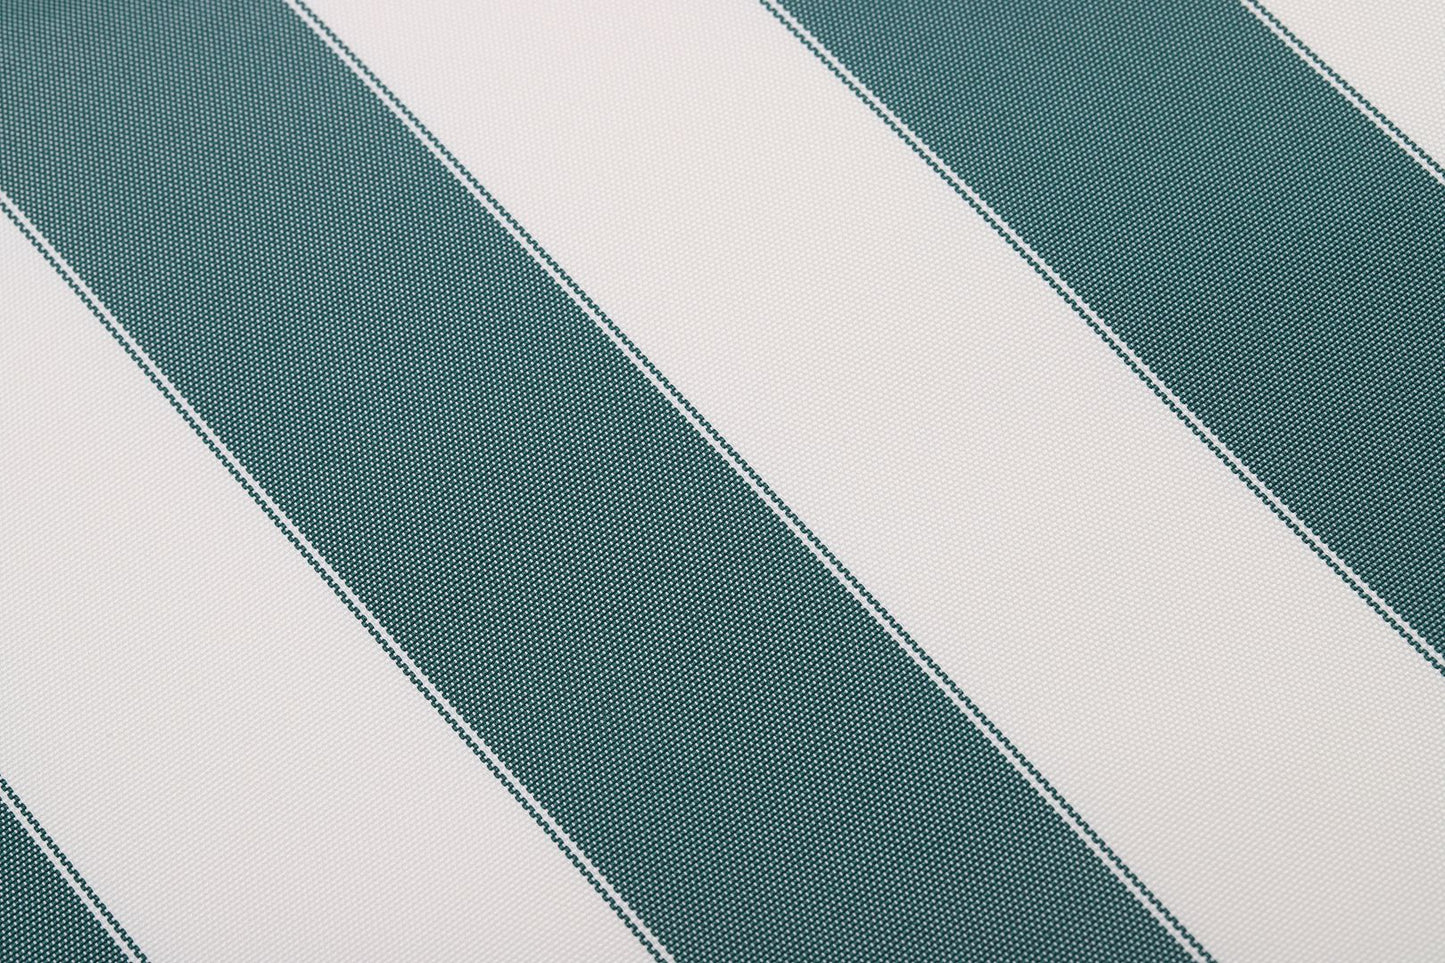 STRIPE CANVAS AWNING FABRIC WATERPROOF OUTDOOR FABRIC 60" Hunter Green & White (1 yards)